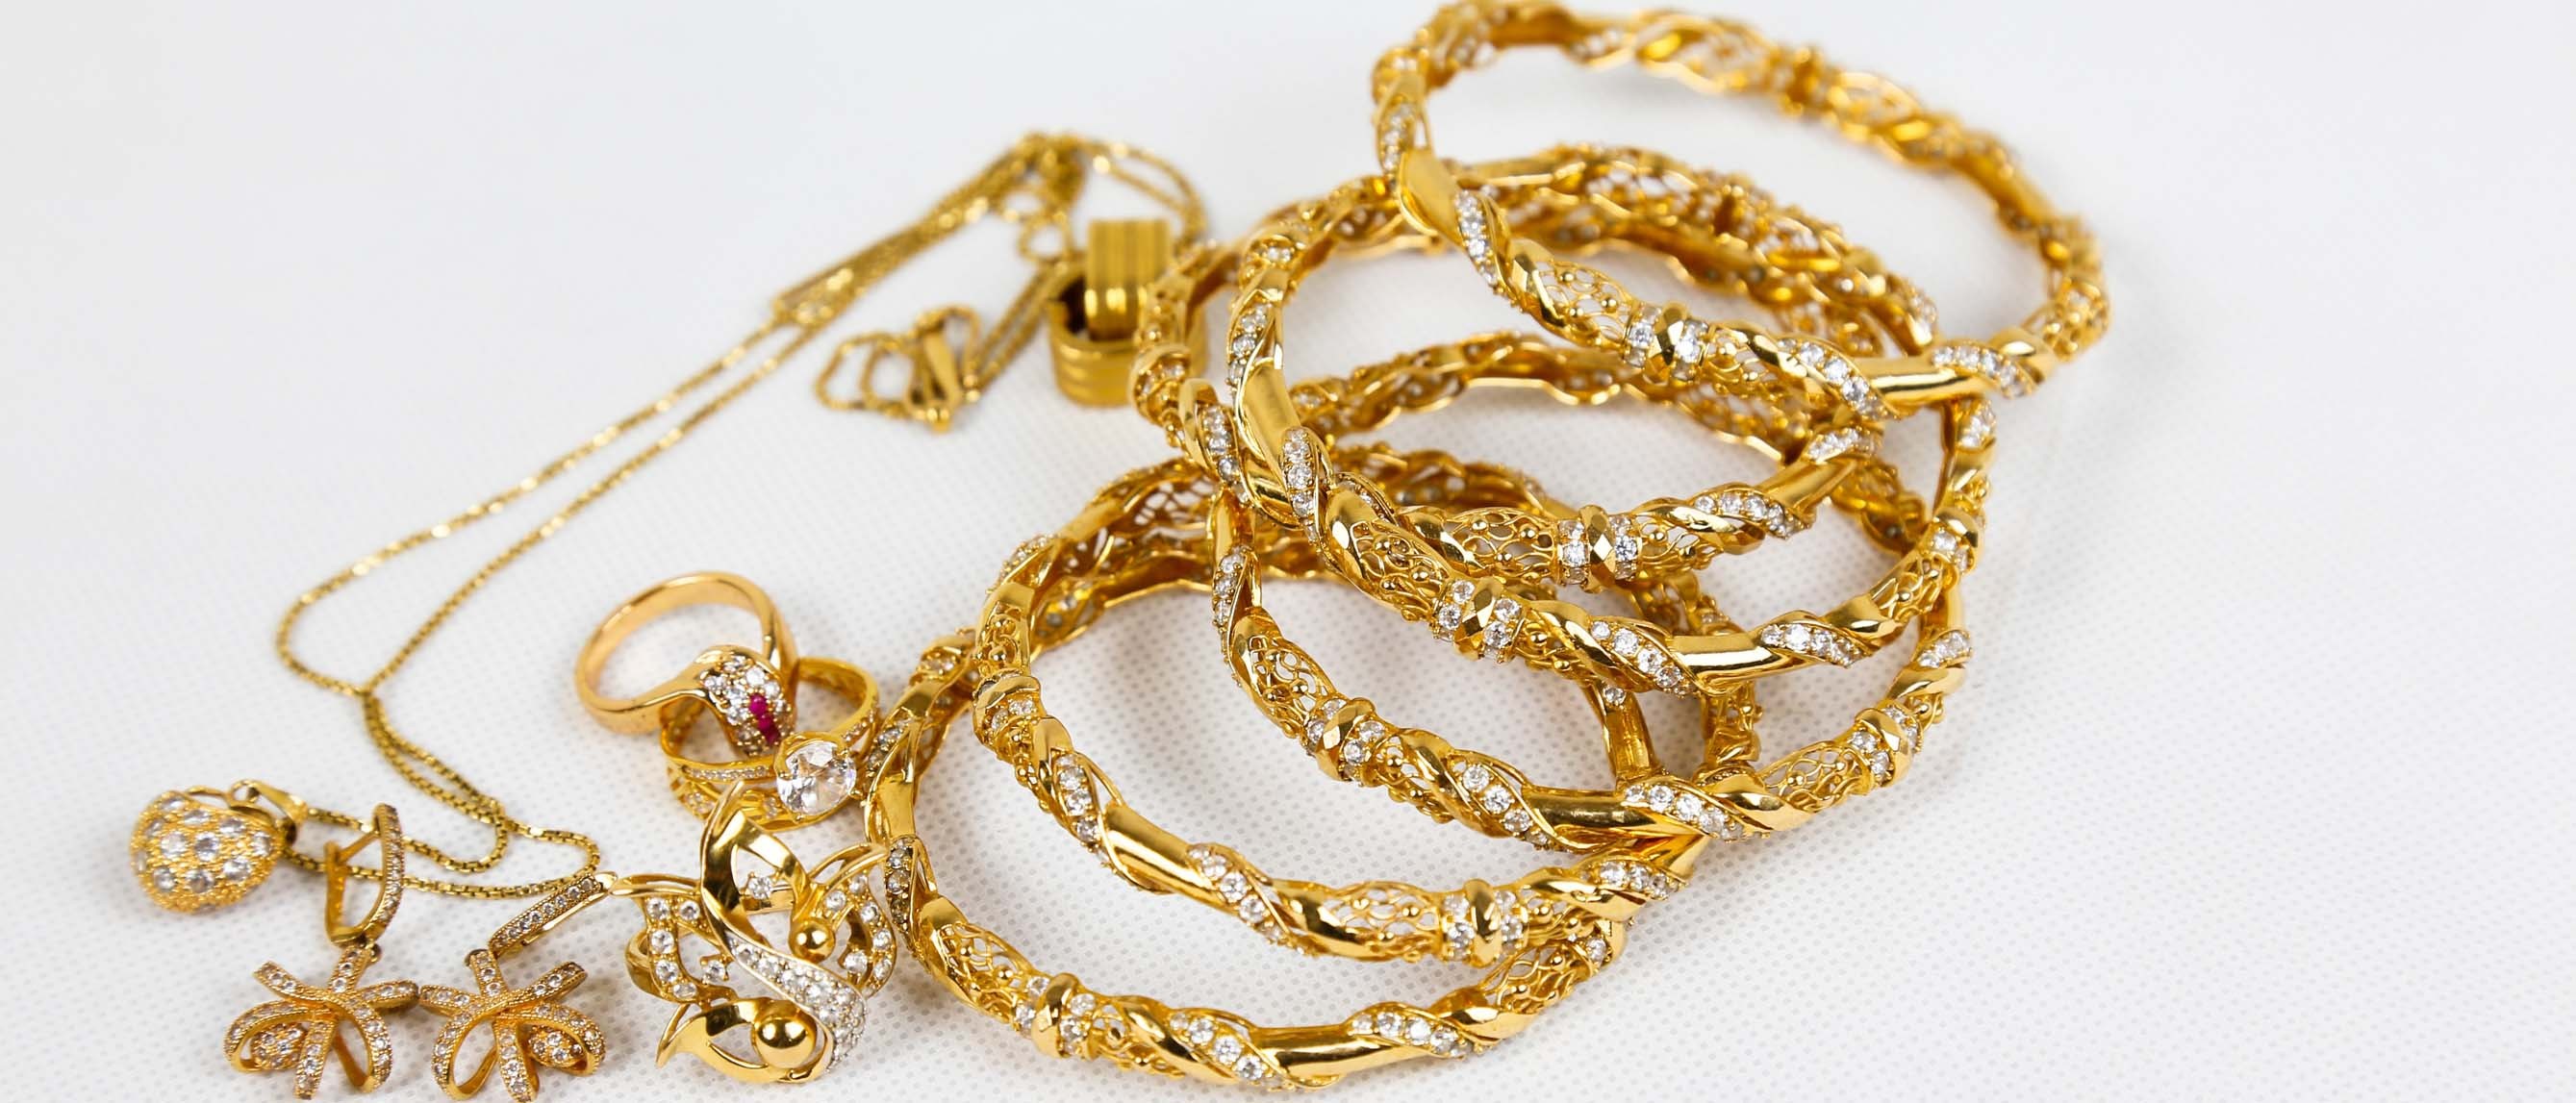 This is how to clean gold jewellery at home